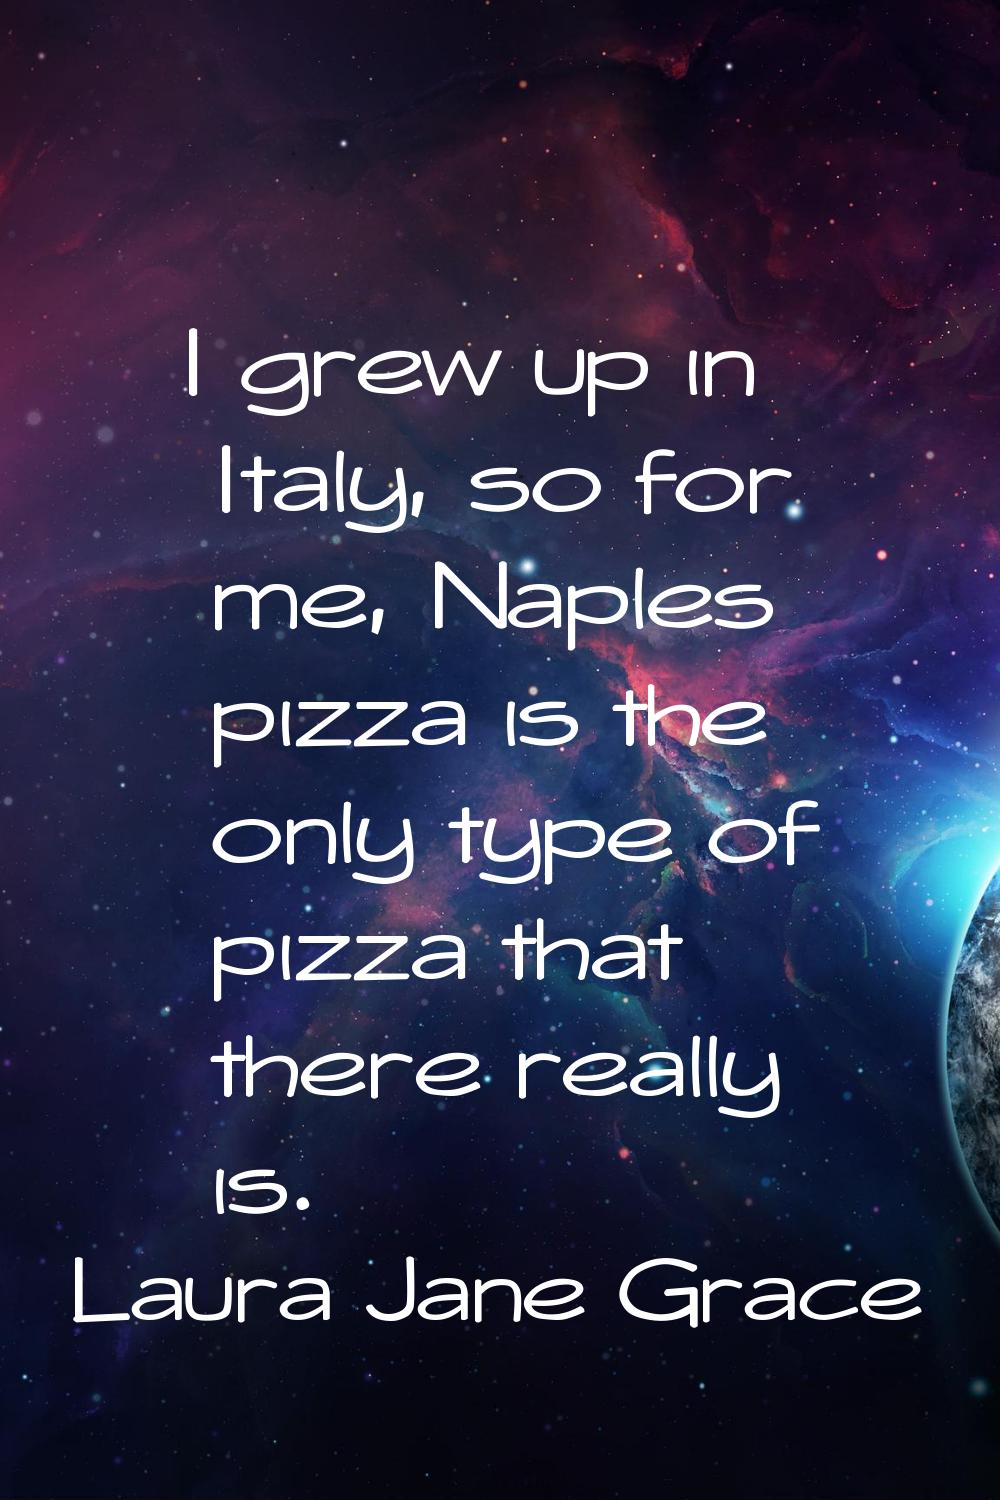 I grew up in Italy, so for me, Naples pizza is the only type of pizza that there really is.